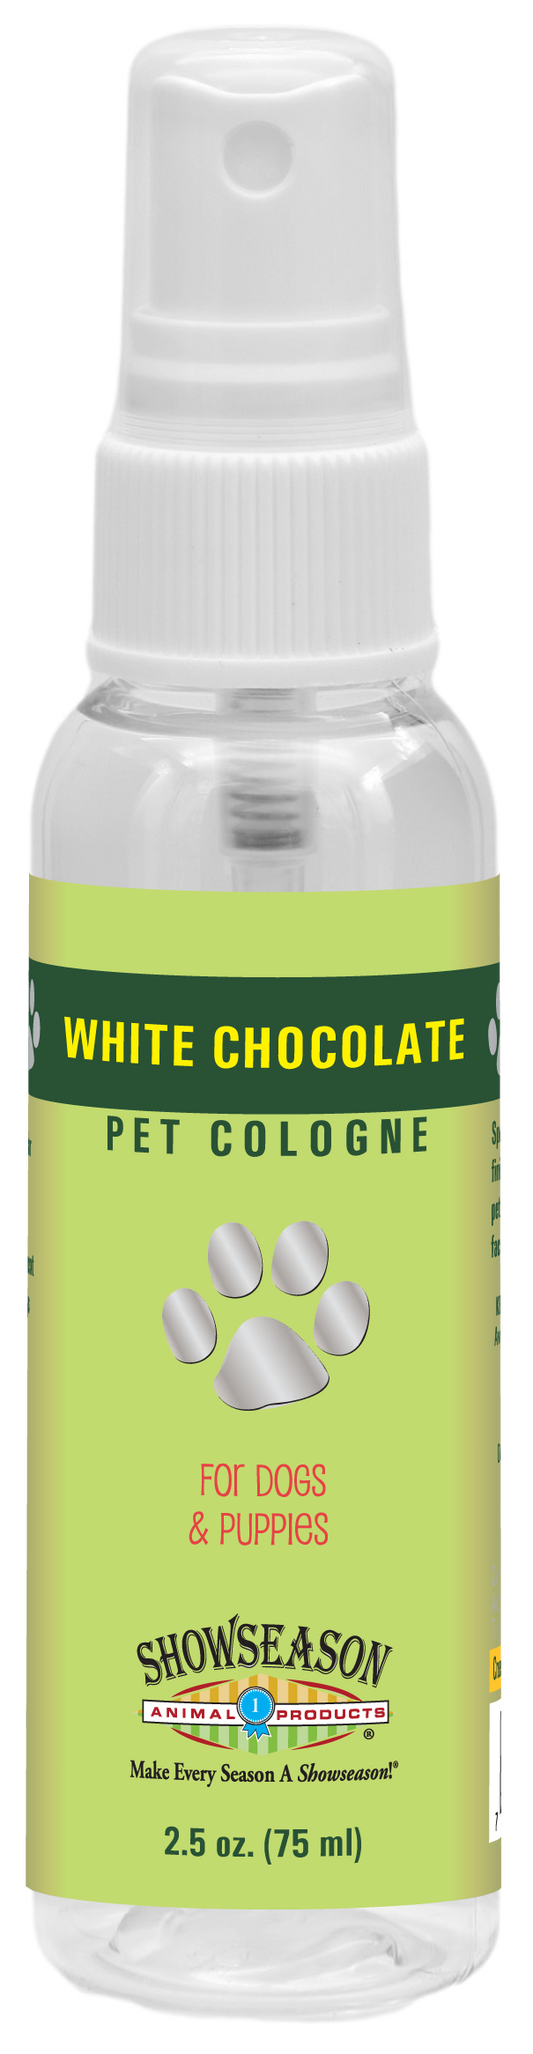 NEW! White Chocolate Pet Cologne | Showseason®